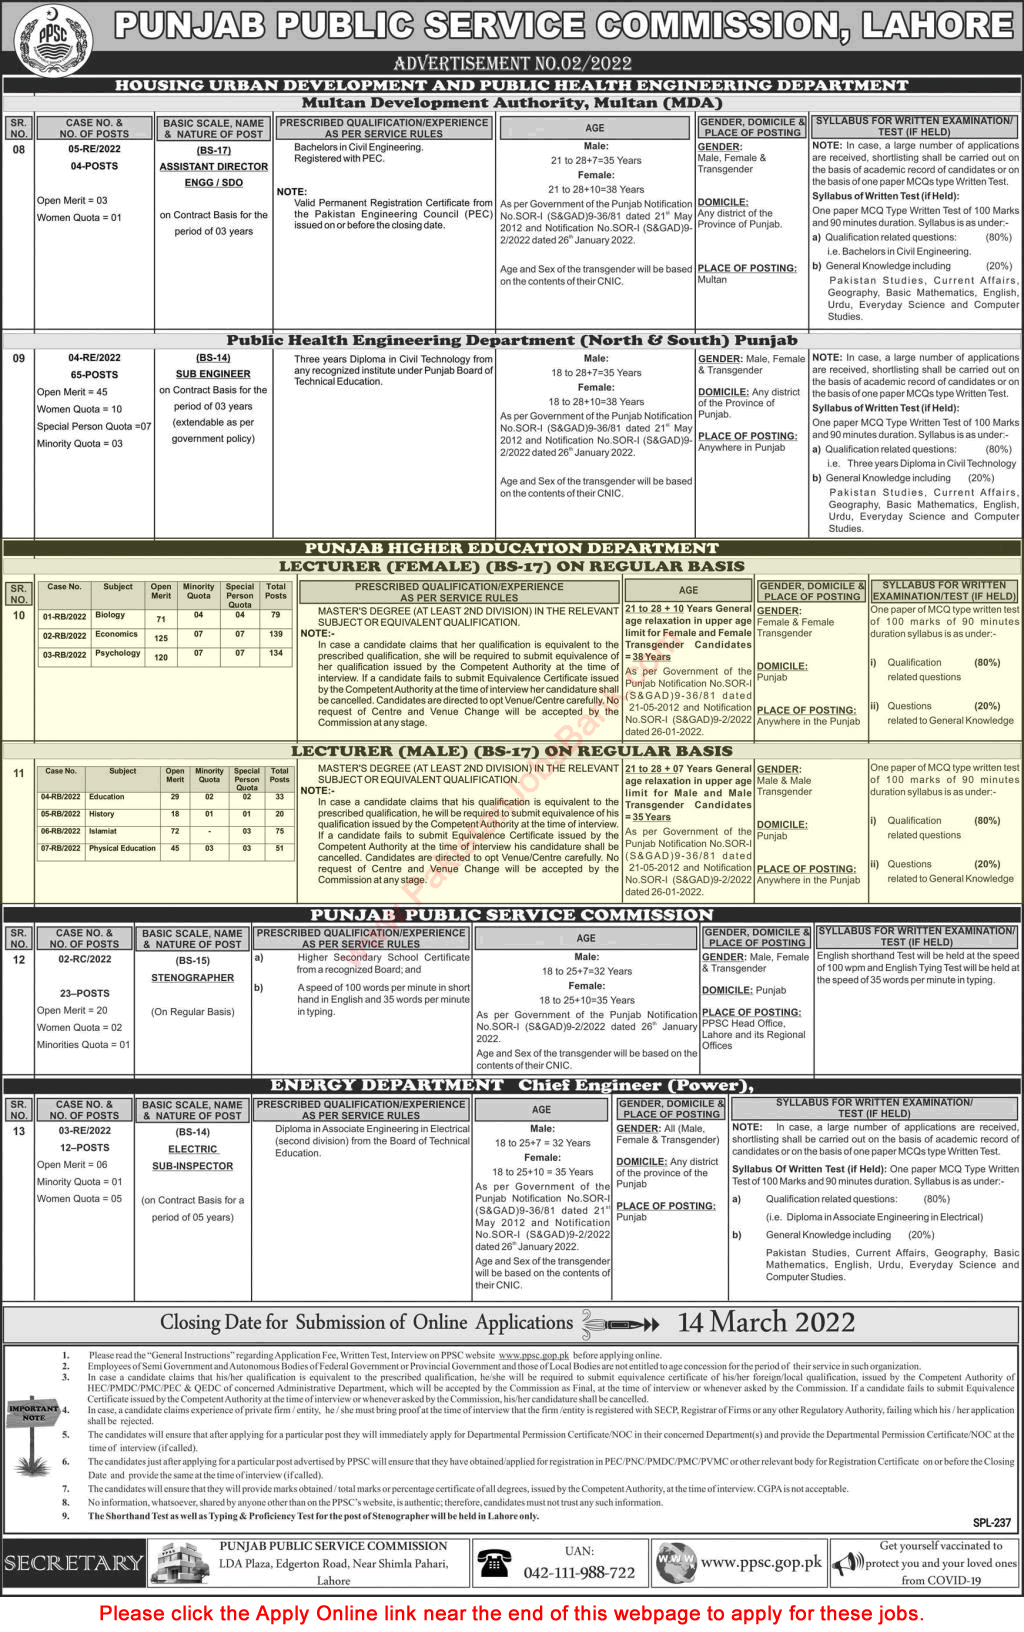 Lecturer Jobs in Punjab Higher Education Department February 2022 PPSC Apply Online Latest